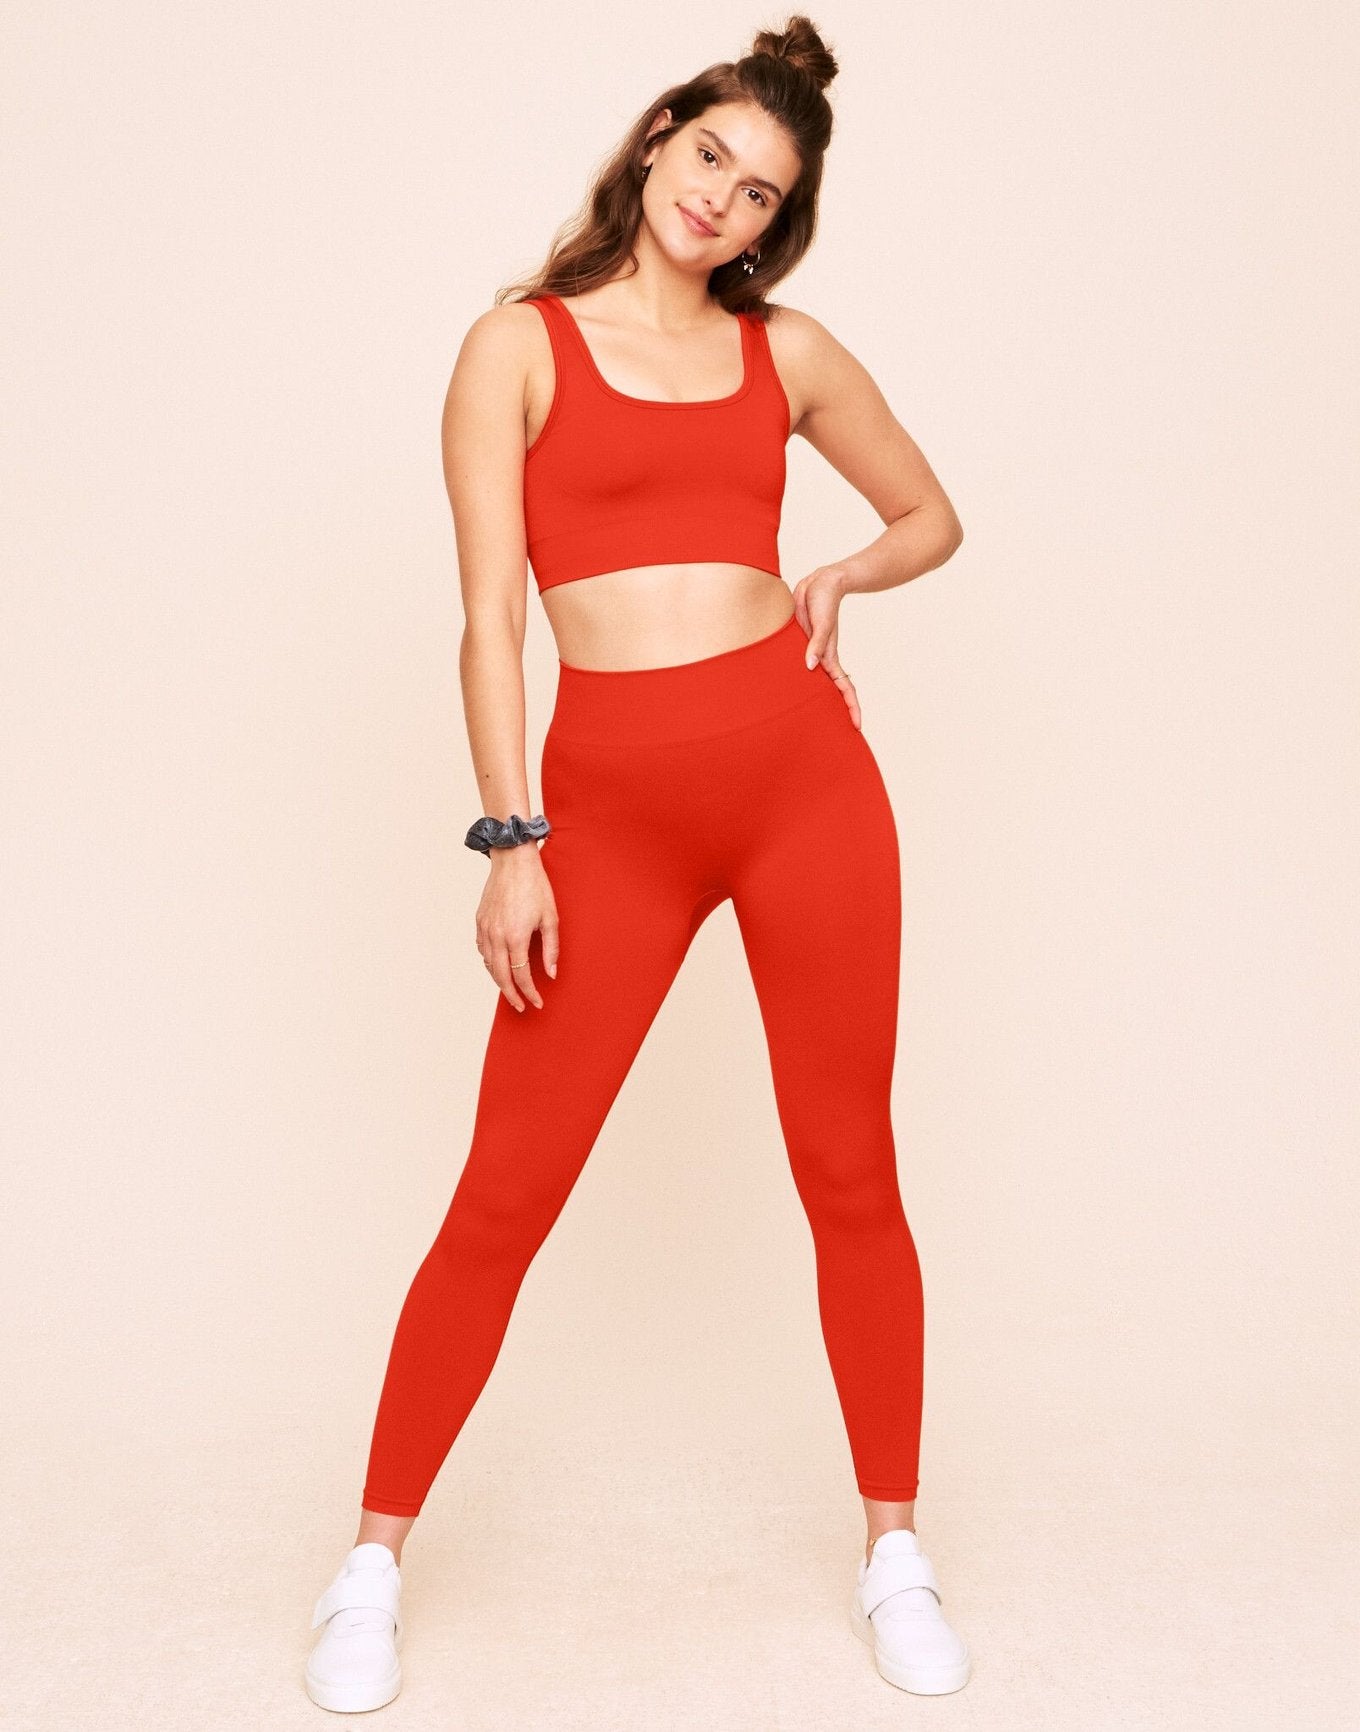 Earth Republic Lilah Ombre Full Legging Leggings in color Solid 05 - Ombre Red and shape legging